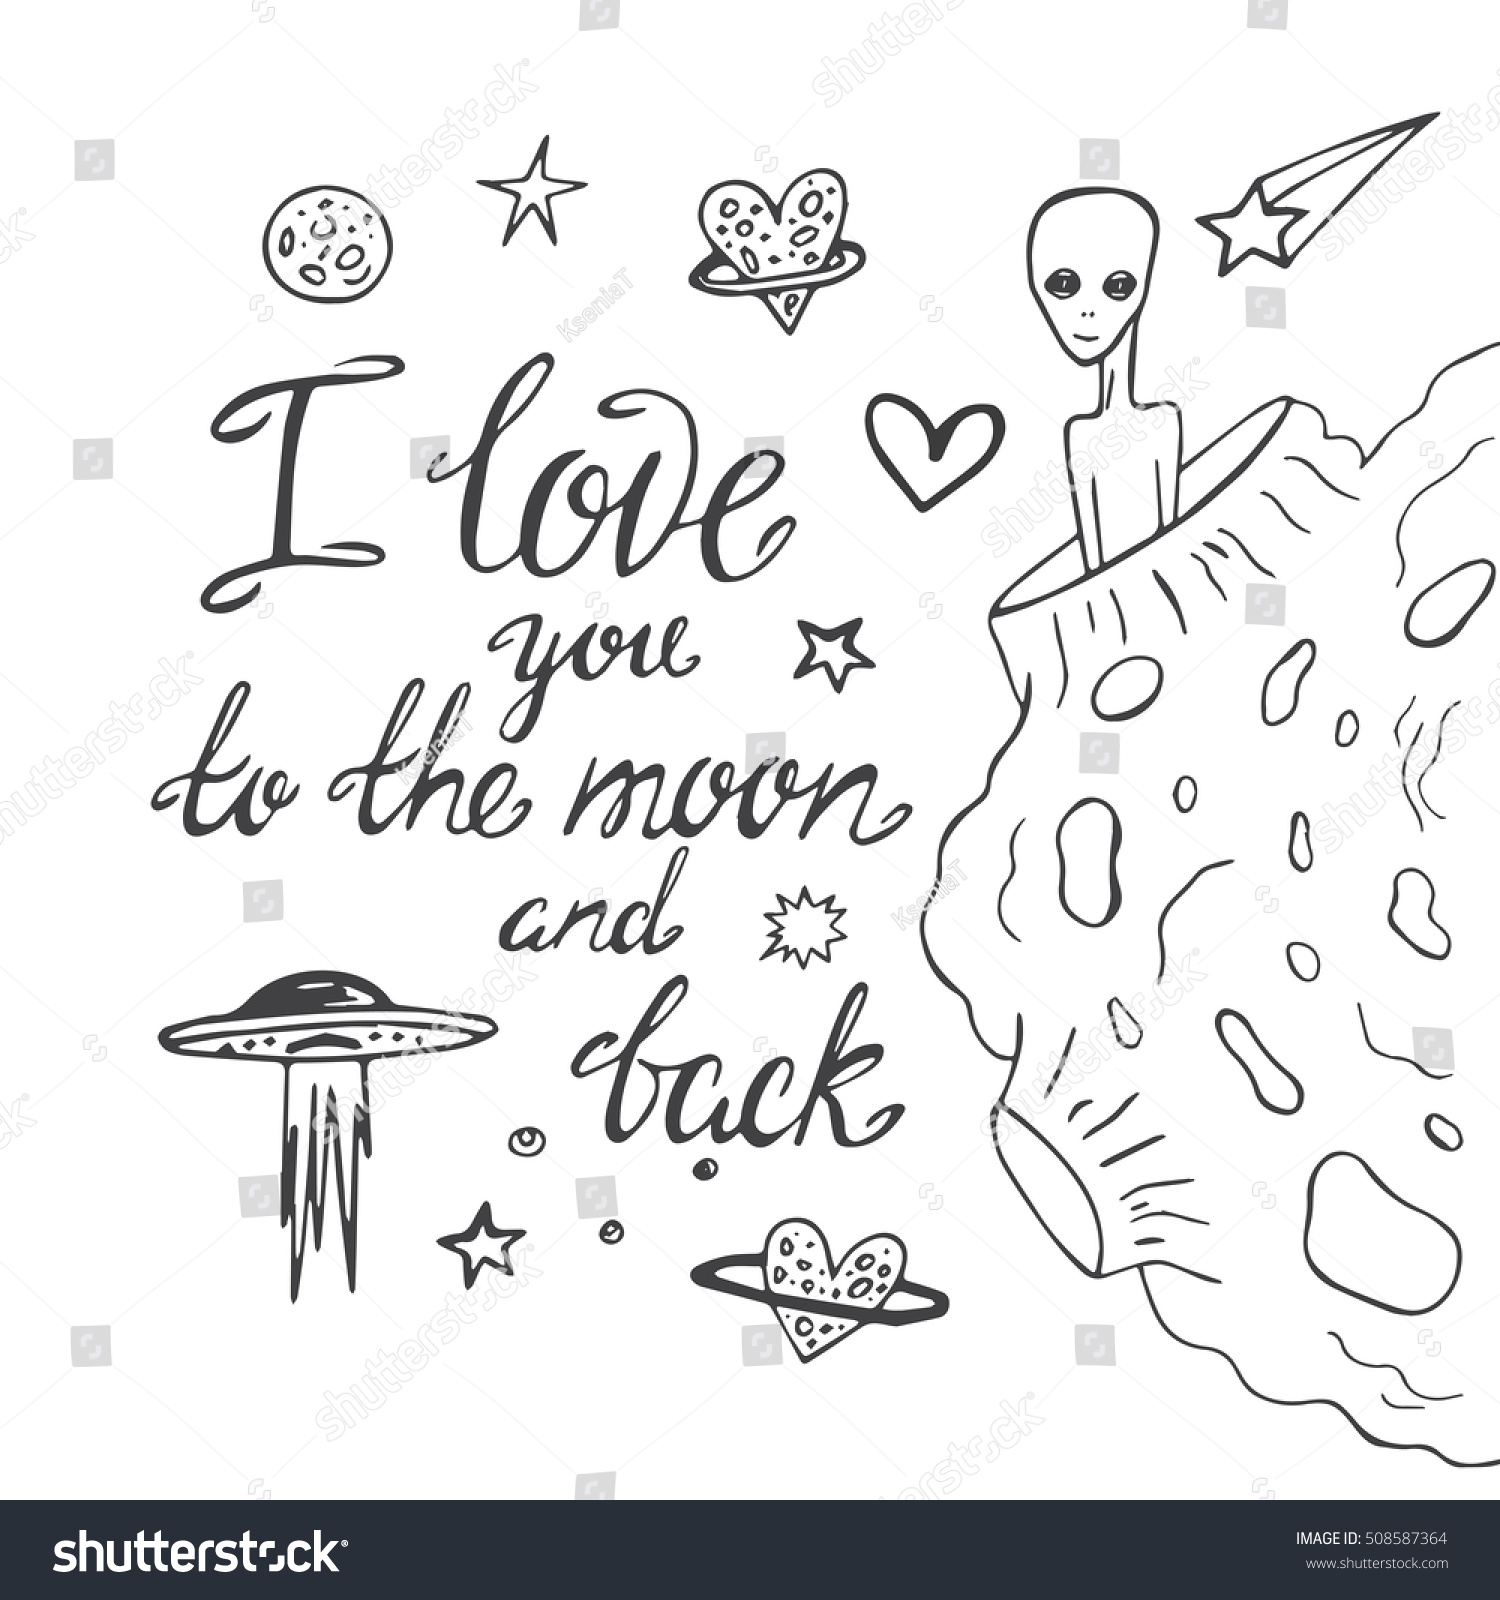 Love You Moon Back Hand Drawn Stock Vector Royalty Free